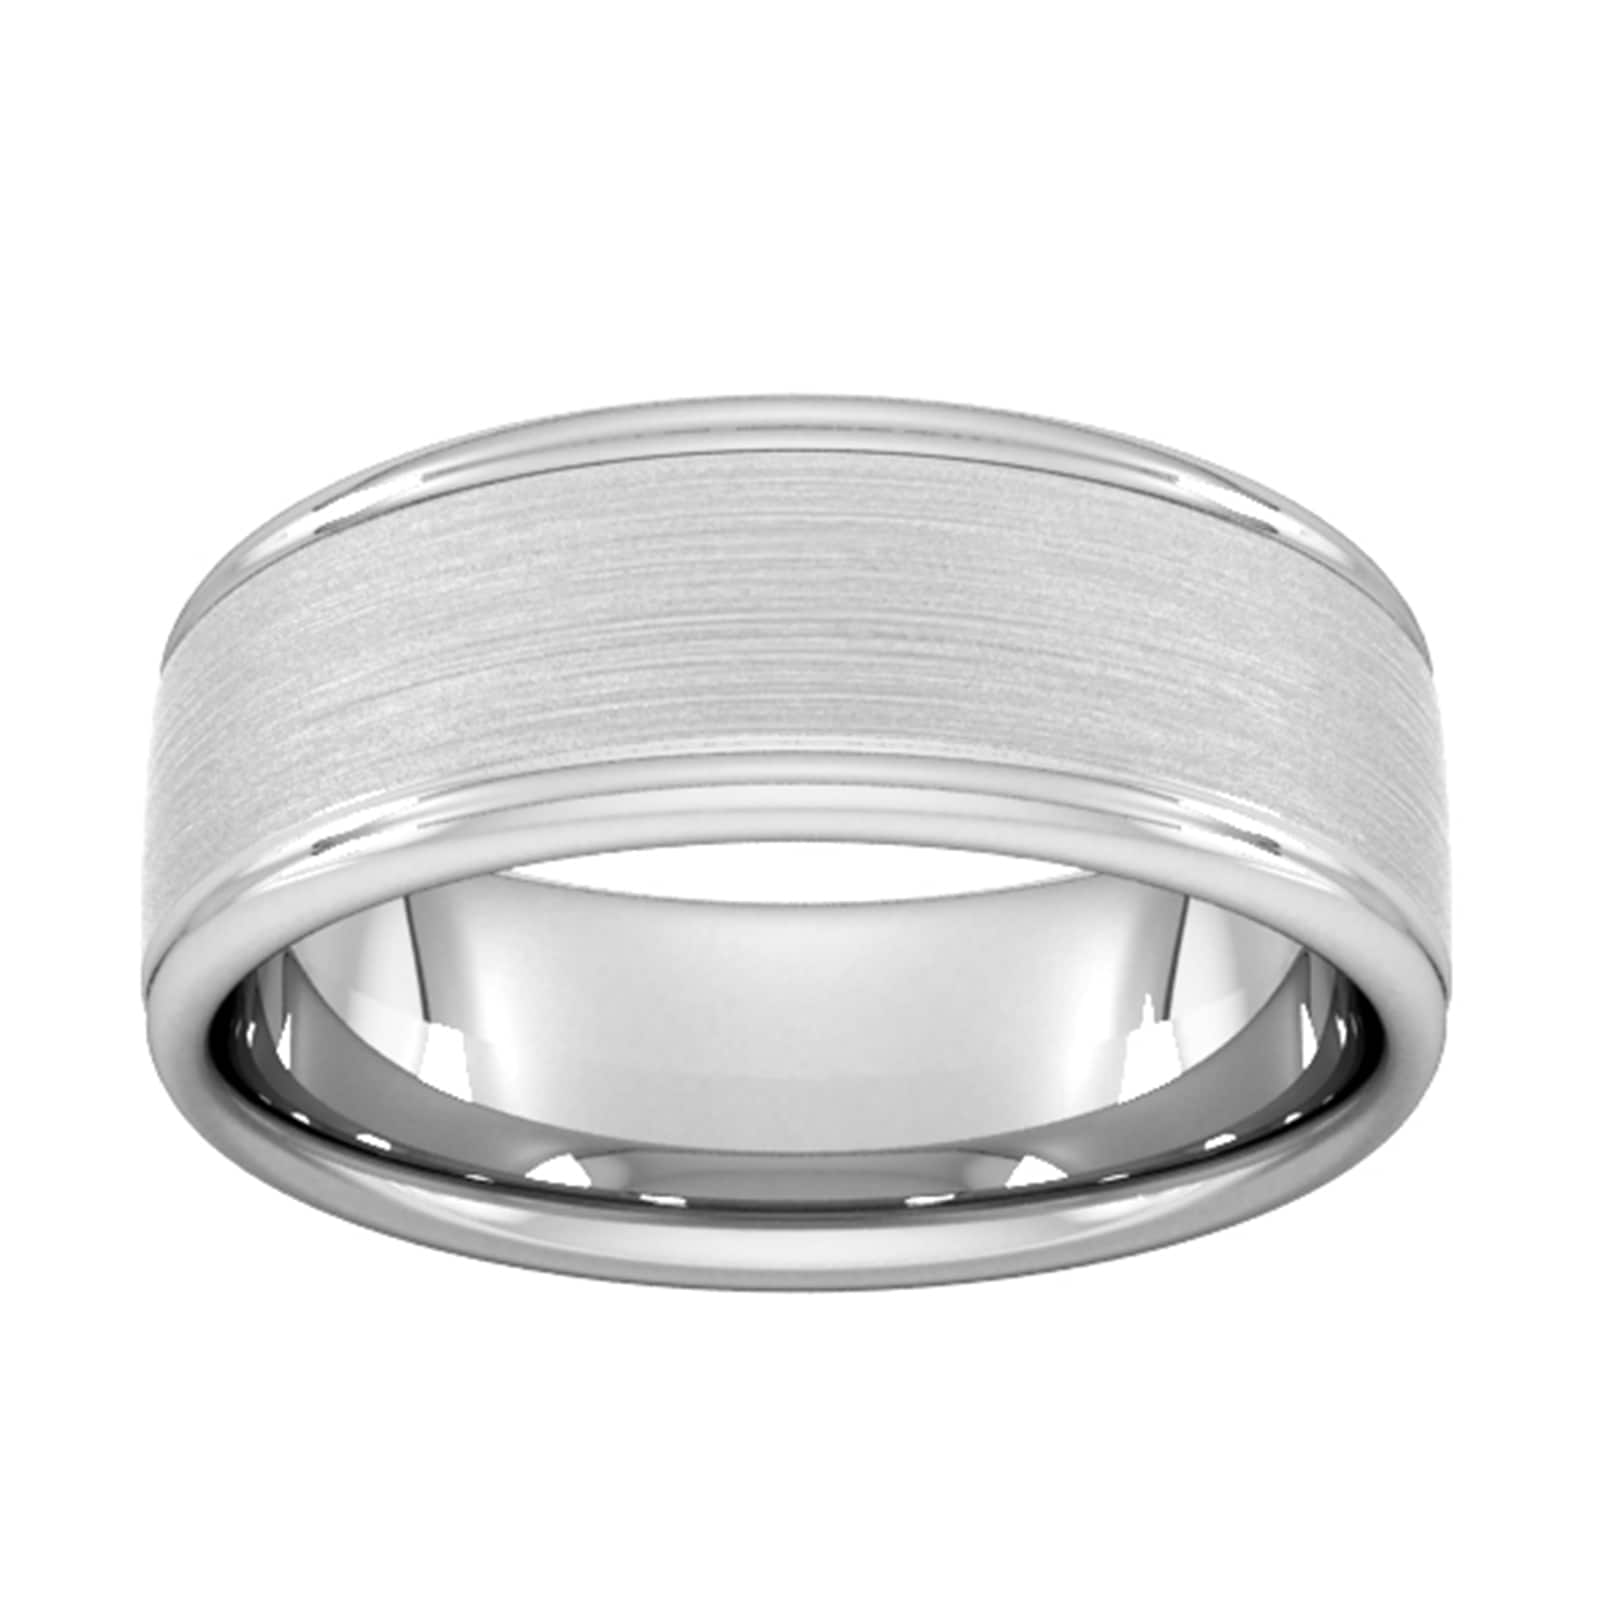 8mm Slight Court Standard Matt Centre With Grooves Wedding Ring In 9 Carat White Gold - Ring Size Y